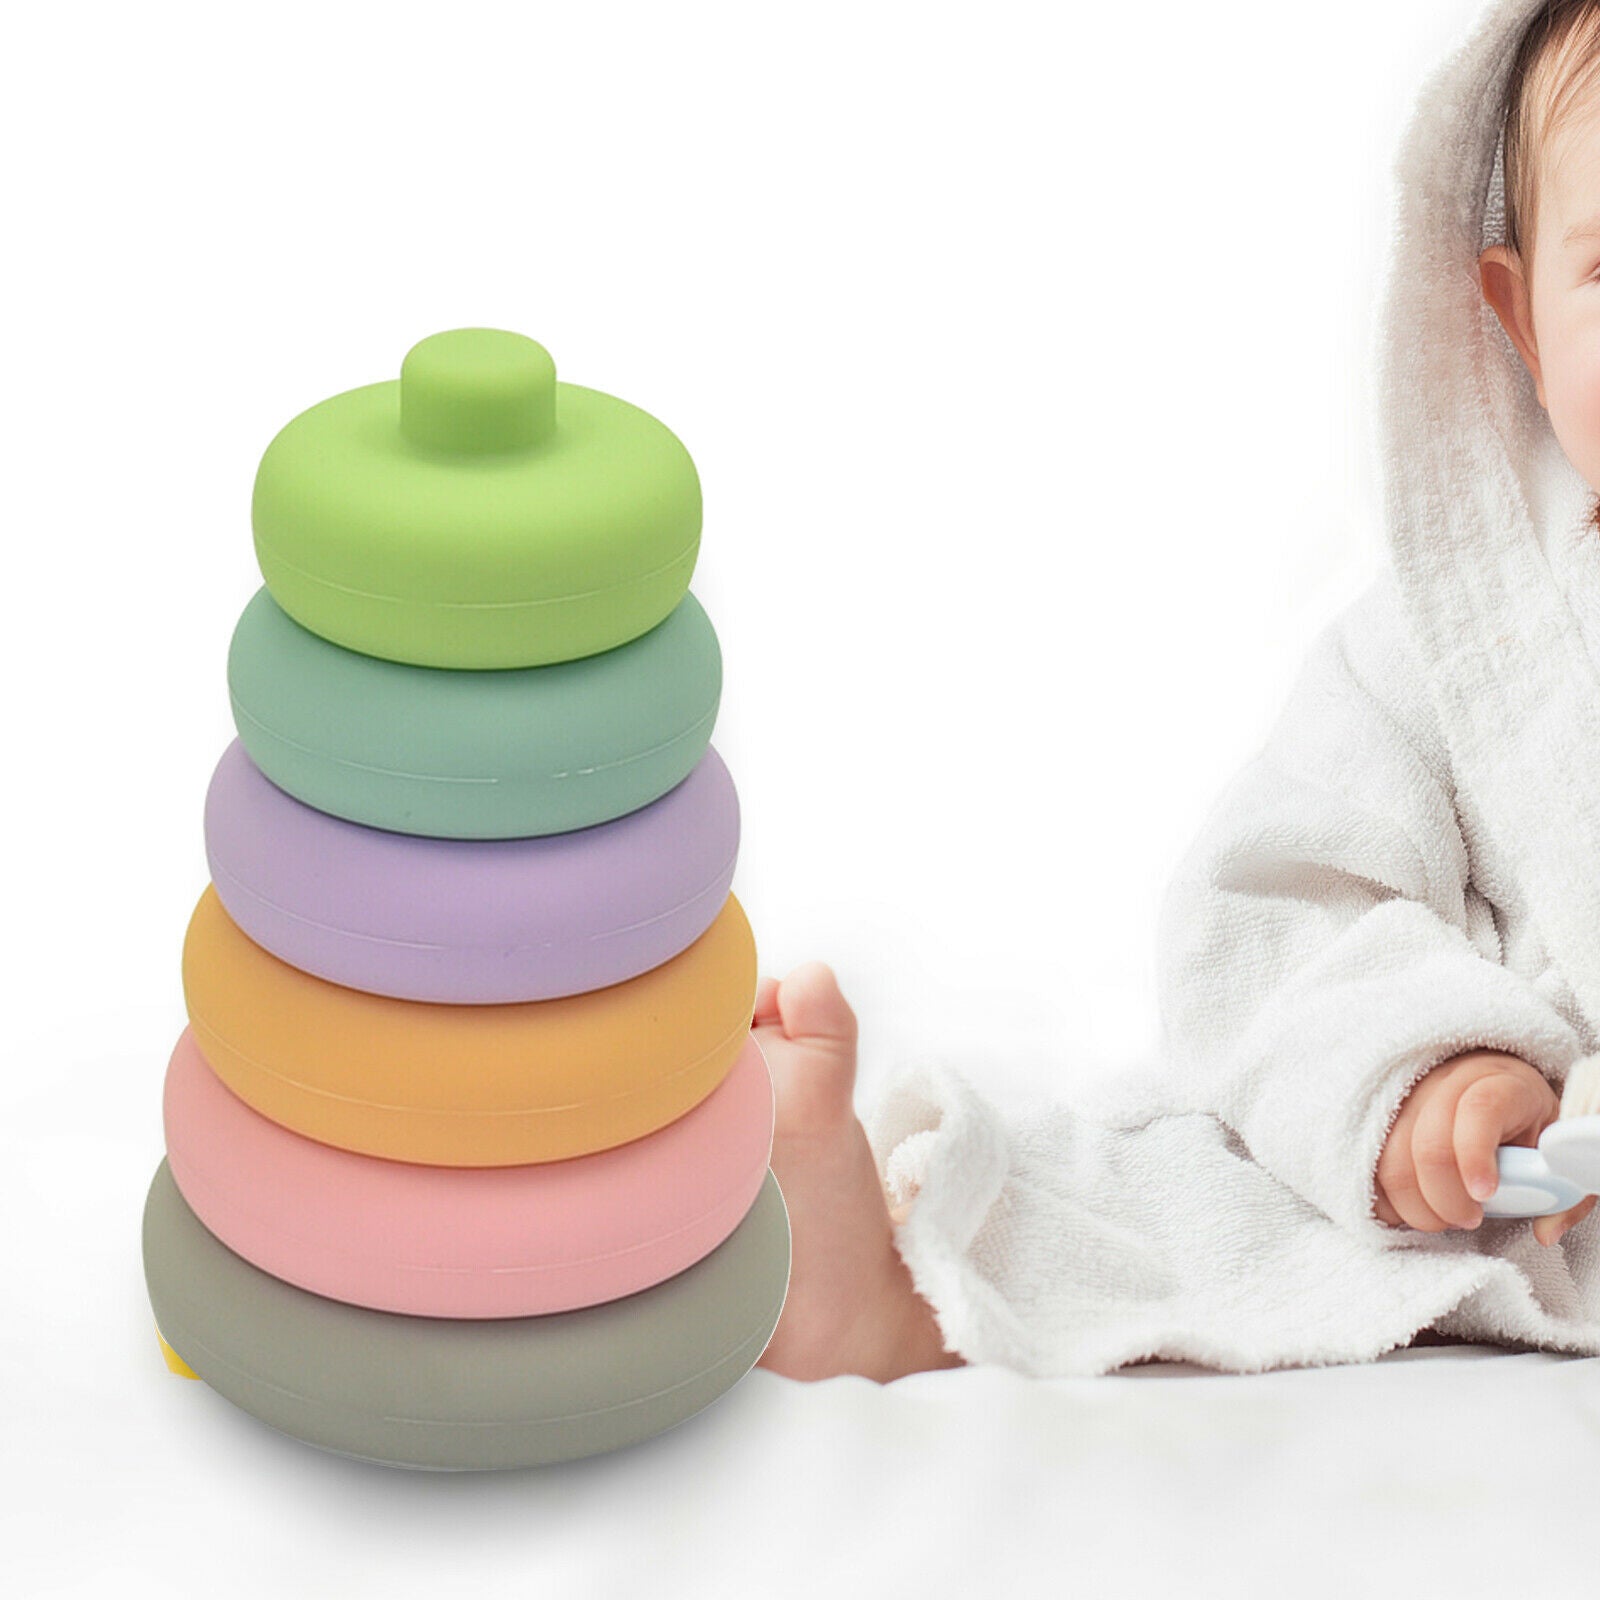 Kids Silicone Baby Stacking Rings Educational Toys Rainbow Fun Stacker